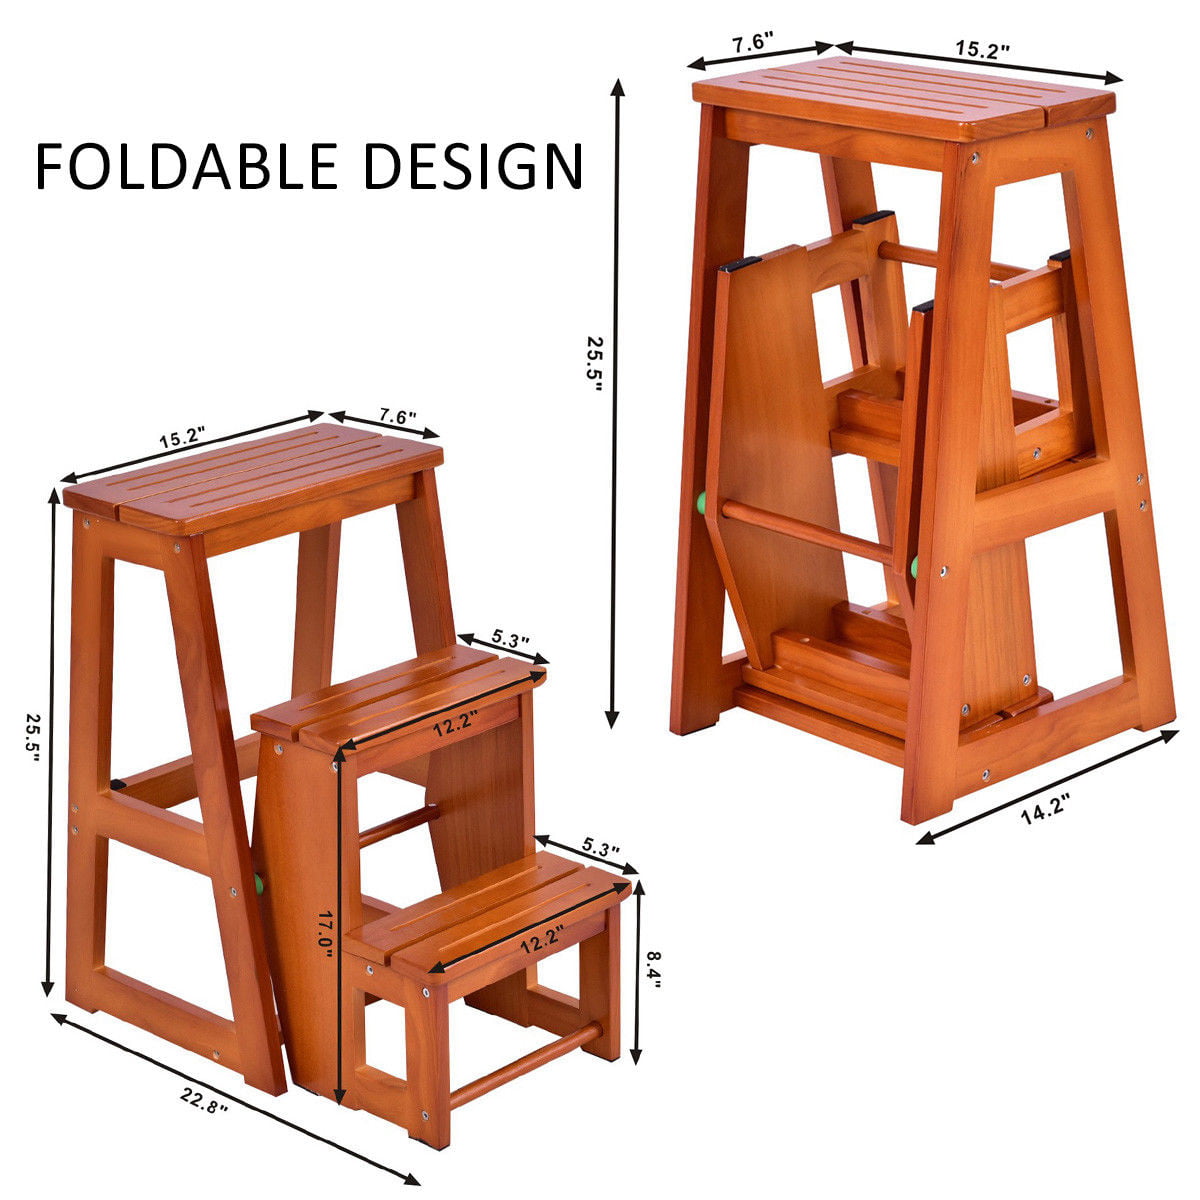 Wood Step Stool Folding 3 Tier Ladder Chair Bench Seat Utility Multi